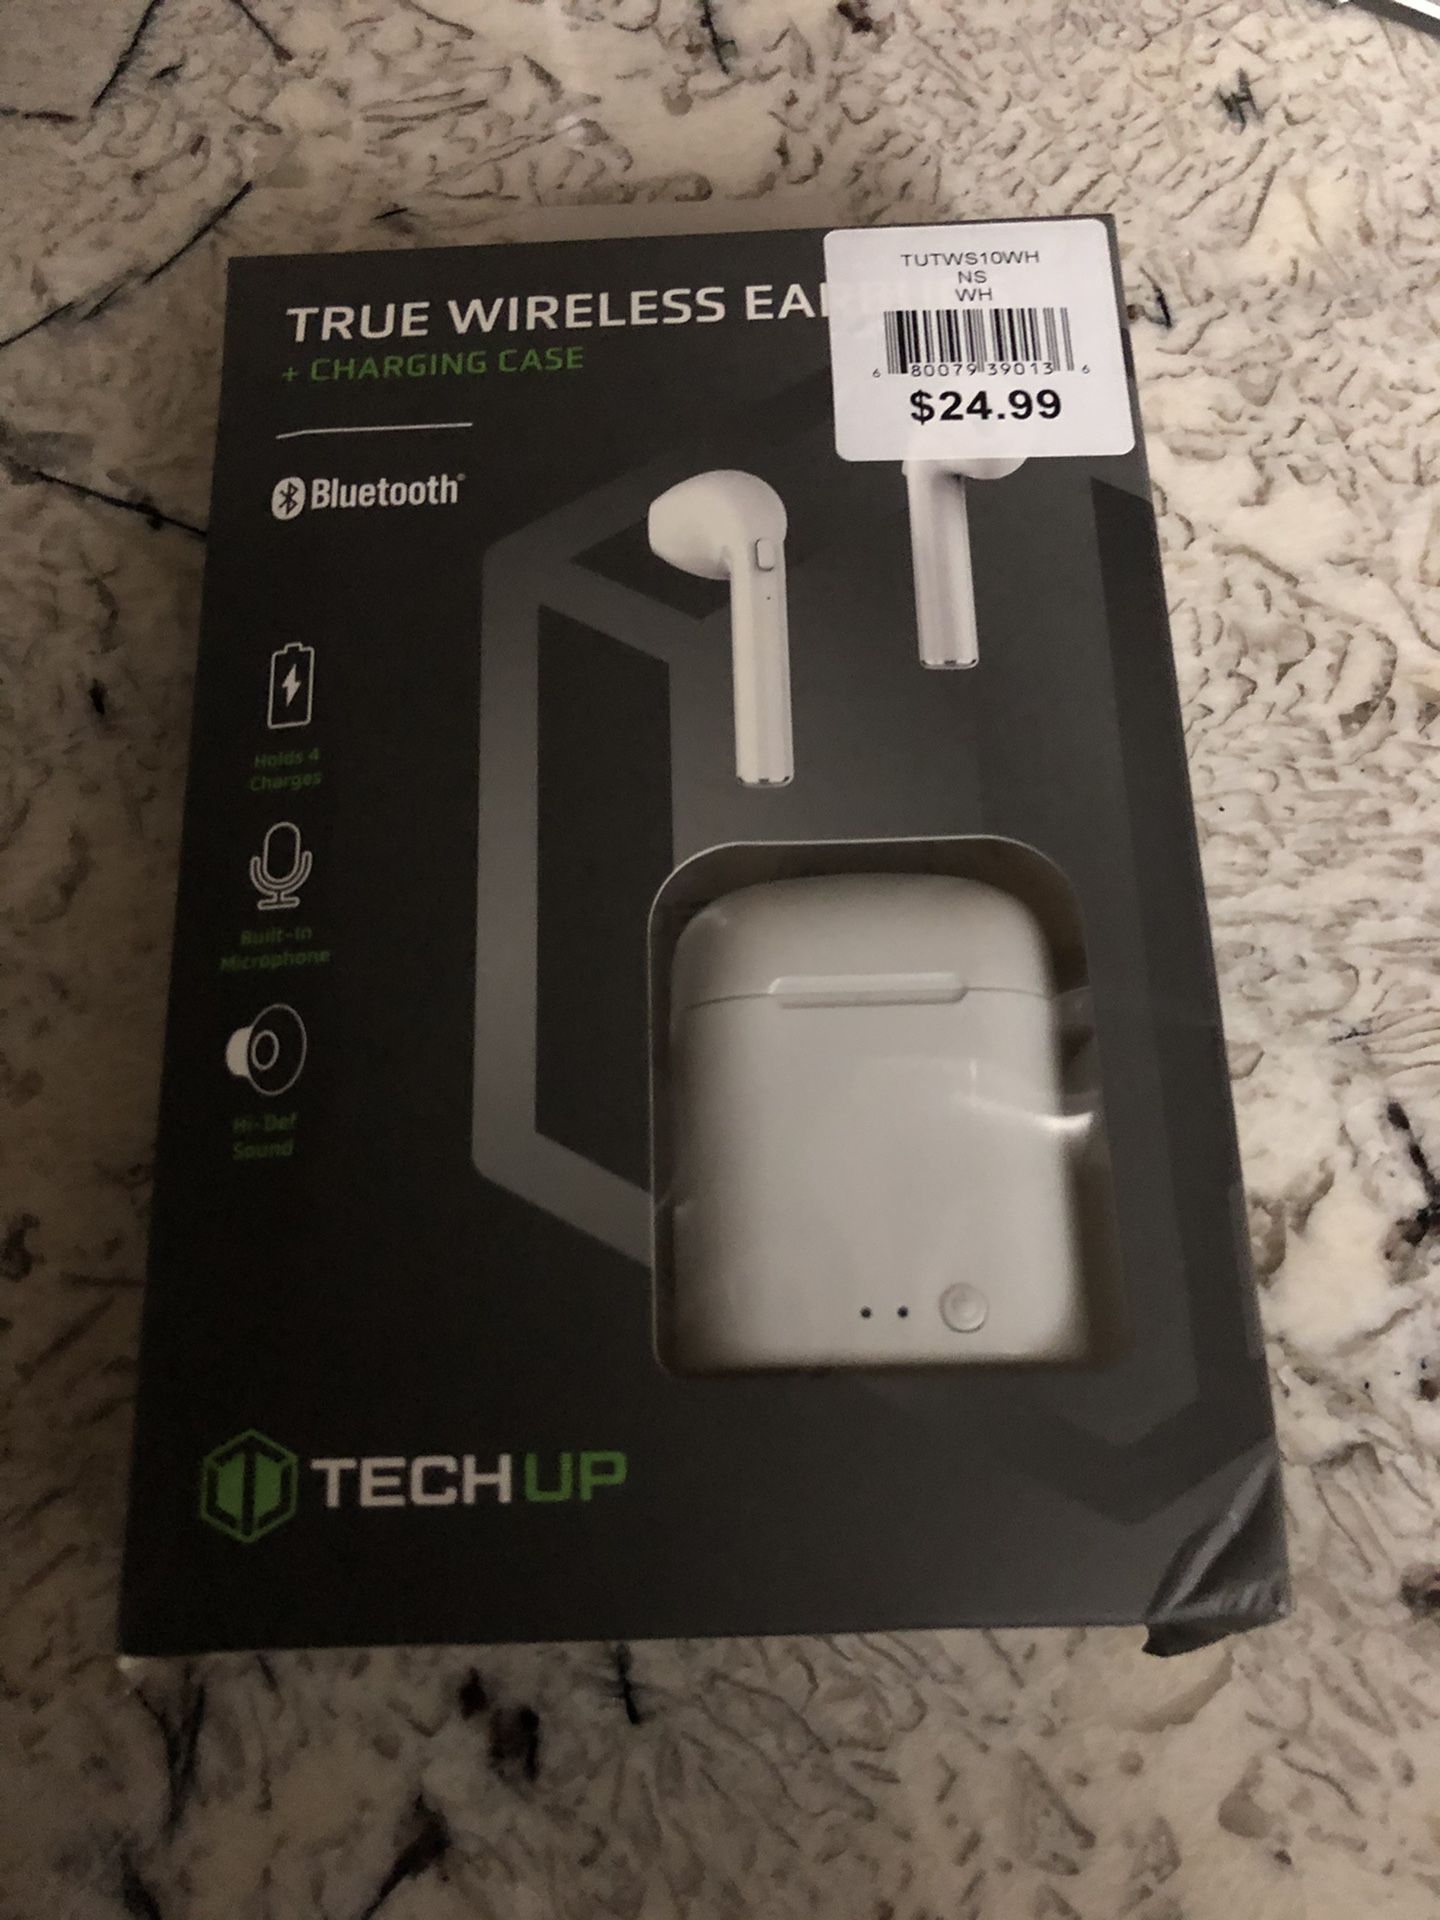 3 wireless earbuds with charging case